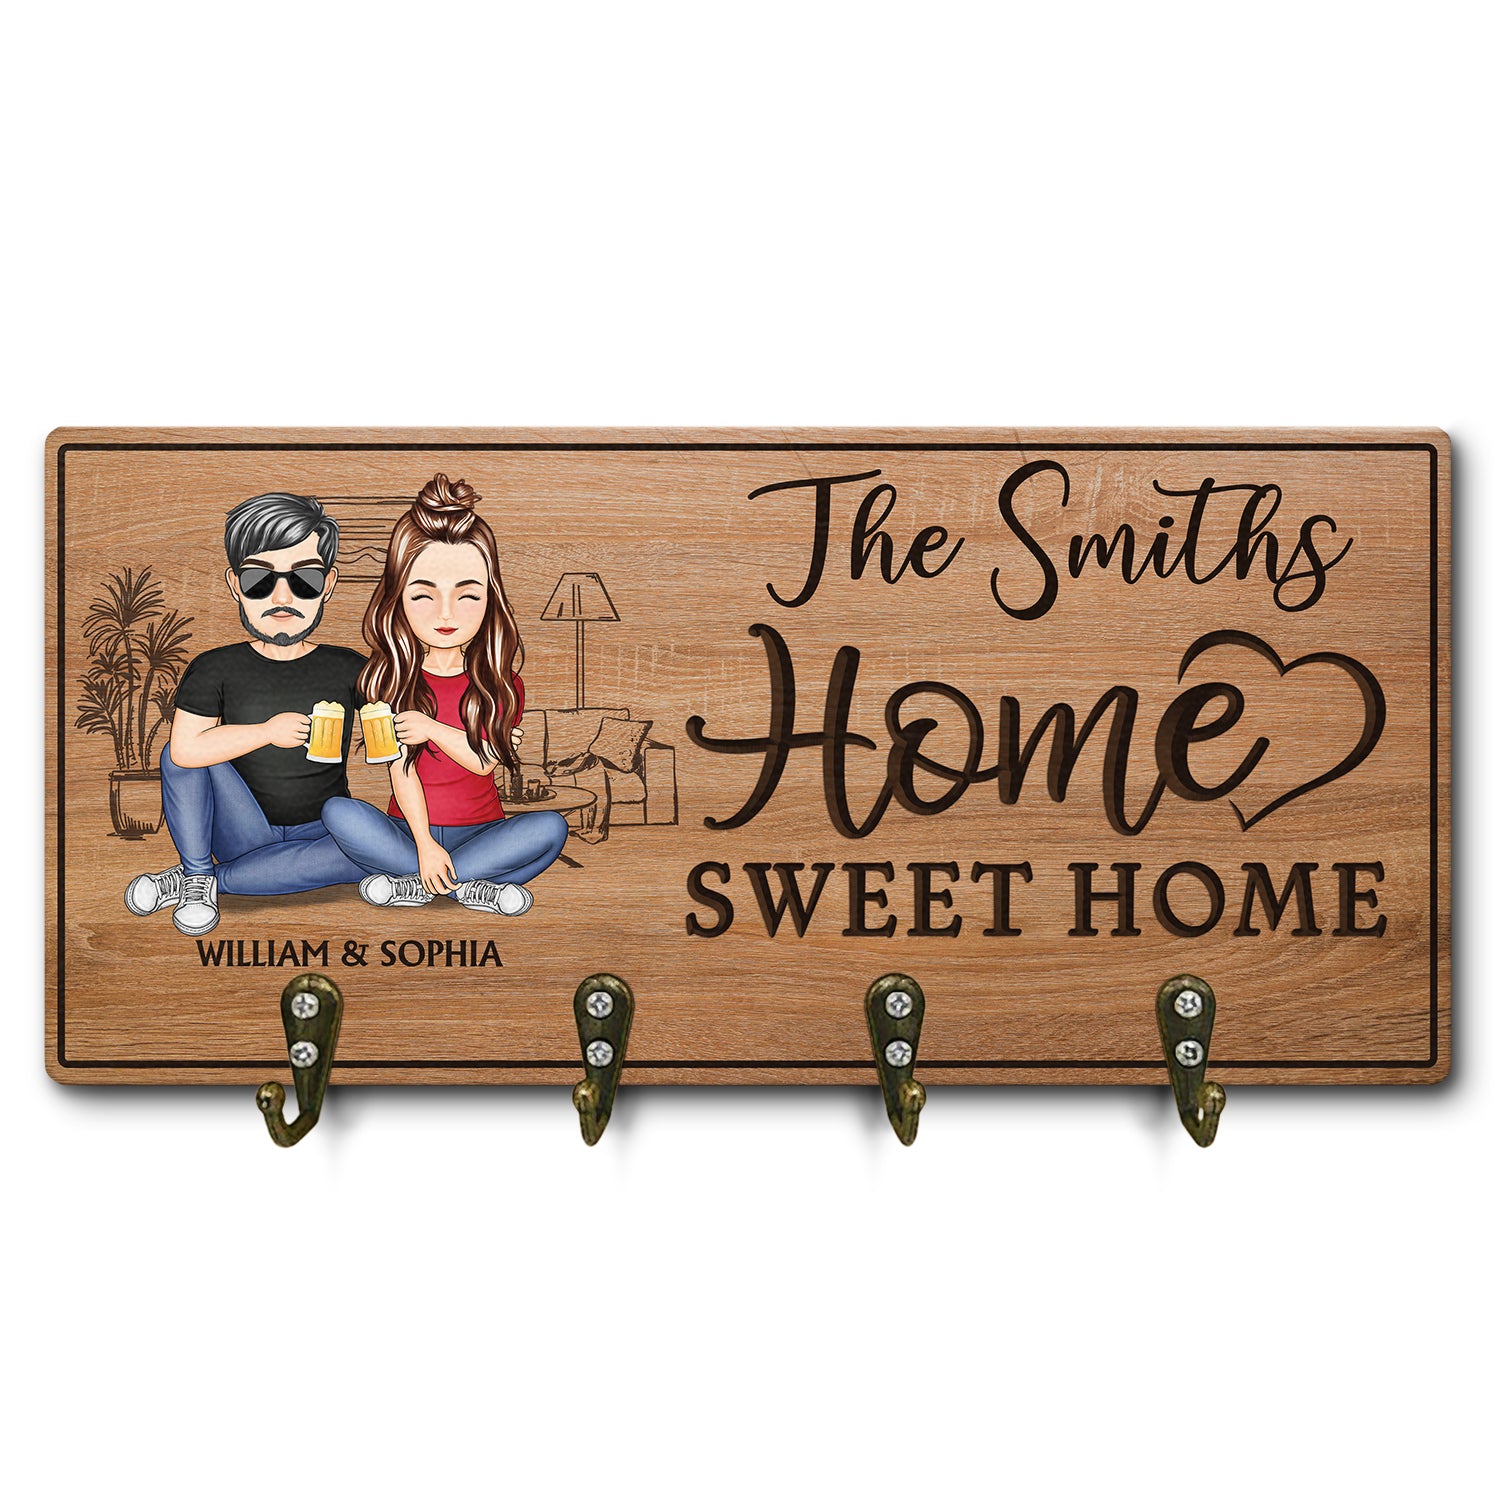 Home Sweet Home Family - Anniversary, Home Decor Gift For Spouse, Lover, Husband, Wife, Boyfriend, Girlfriend, Couple - Personalized Custom Wood Key Holder